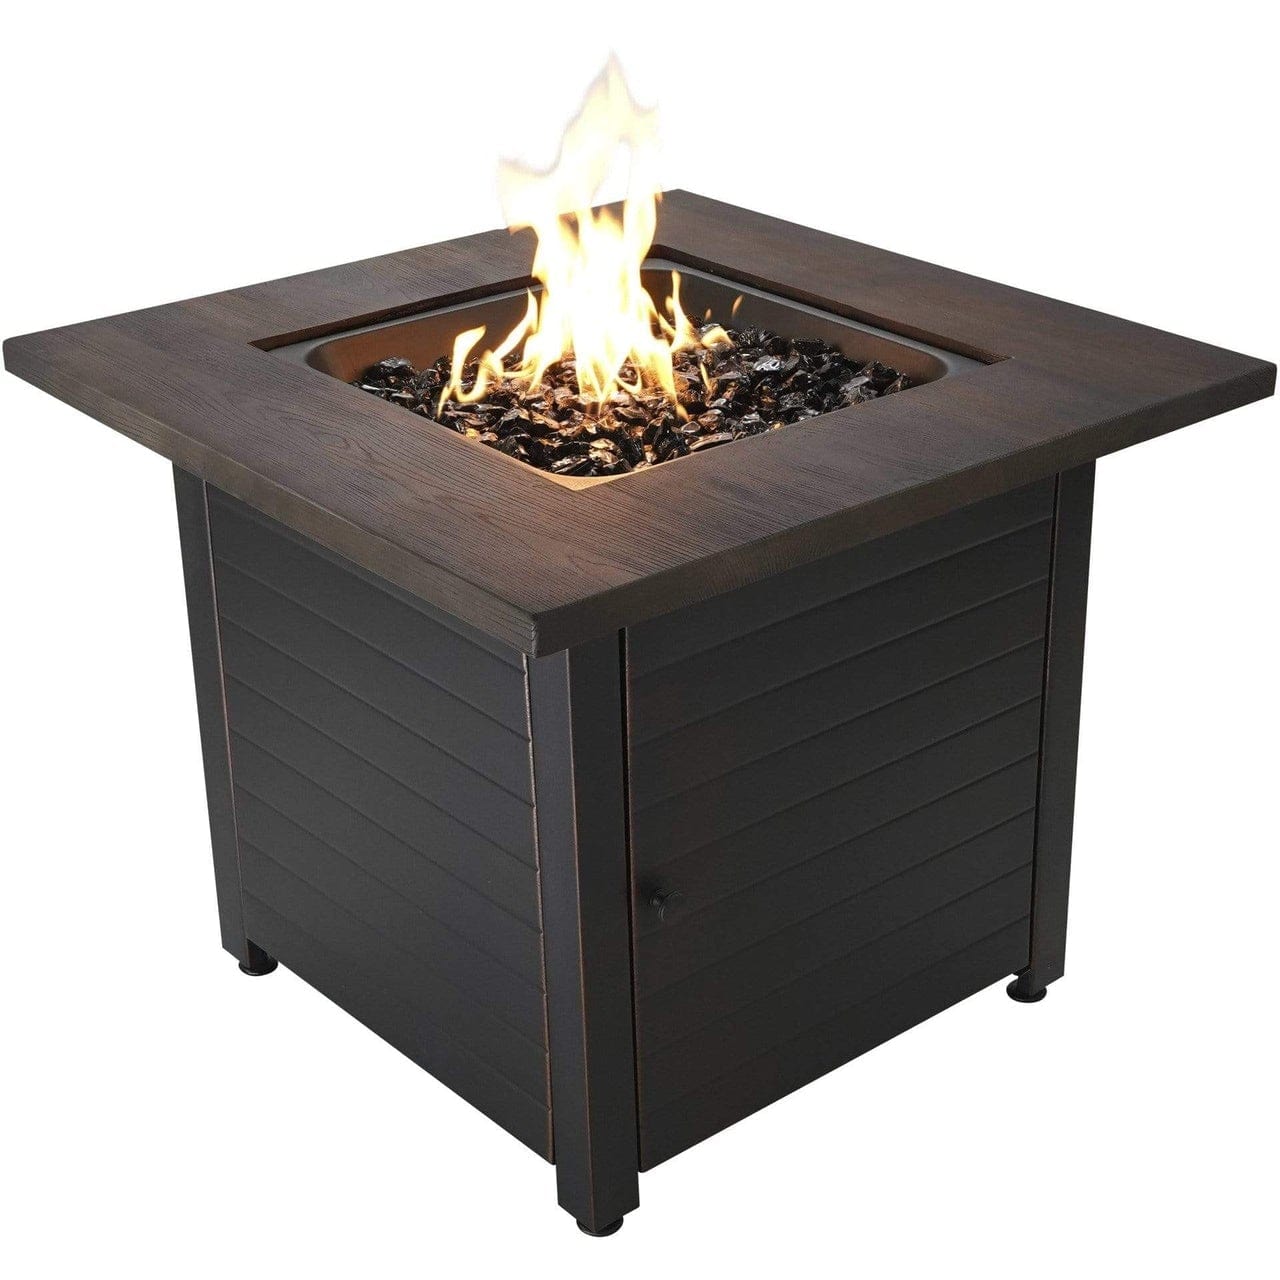 StarWood Fireplaces - Endless Summer Spencer LP Gas Outdoor Fire Pit -